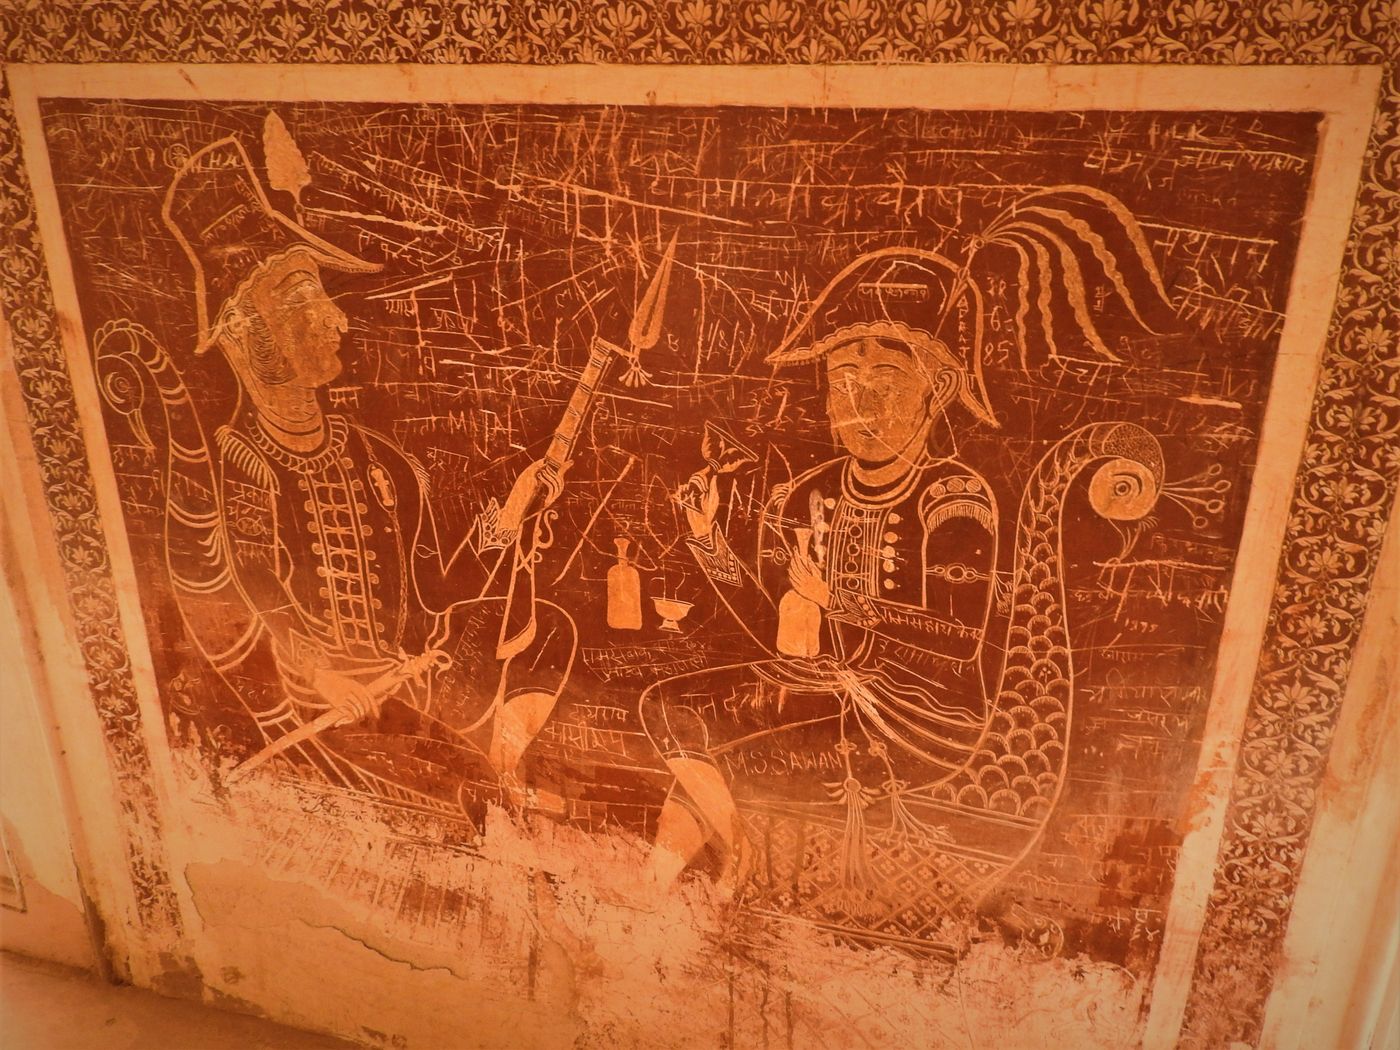 Paintings of British officers holding their guns while one of them enjoys a glass of wine, Orchha 